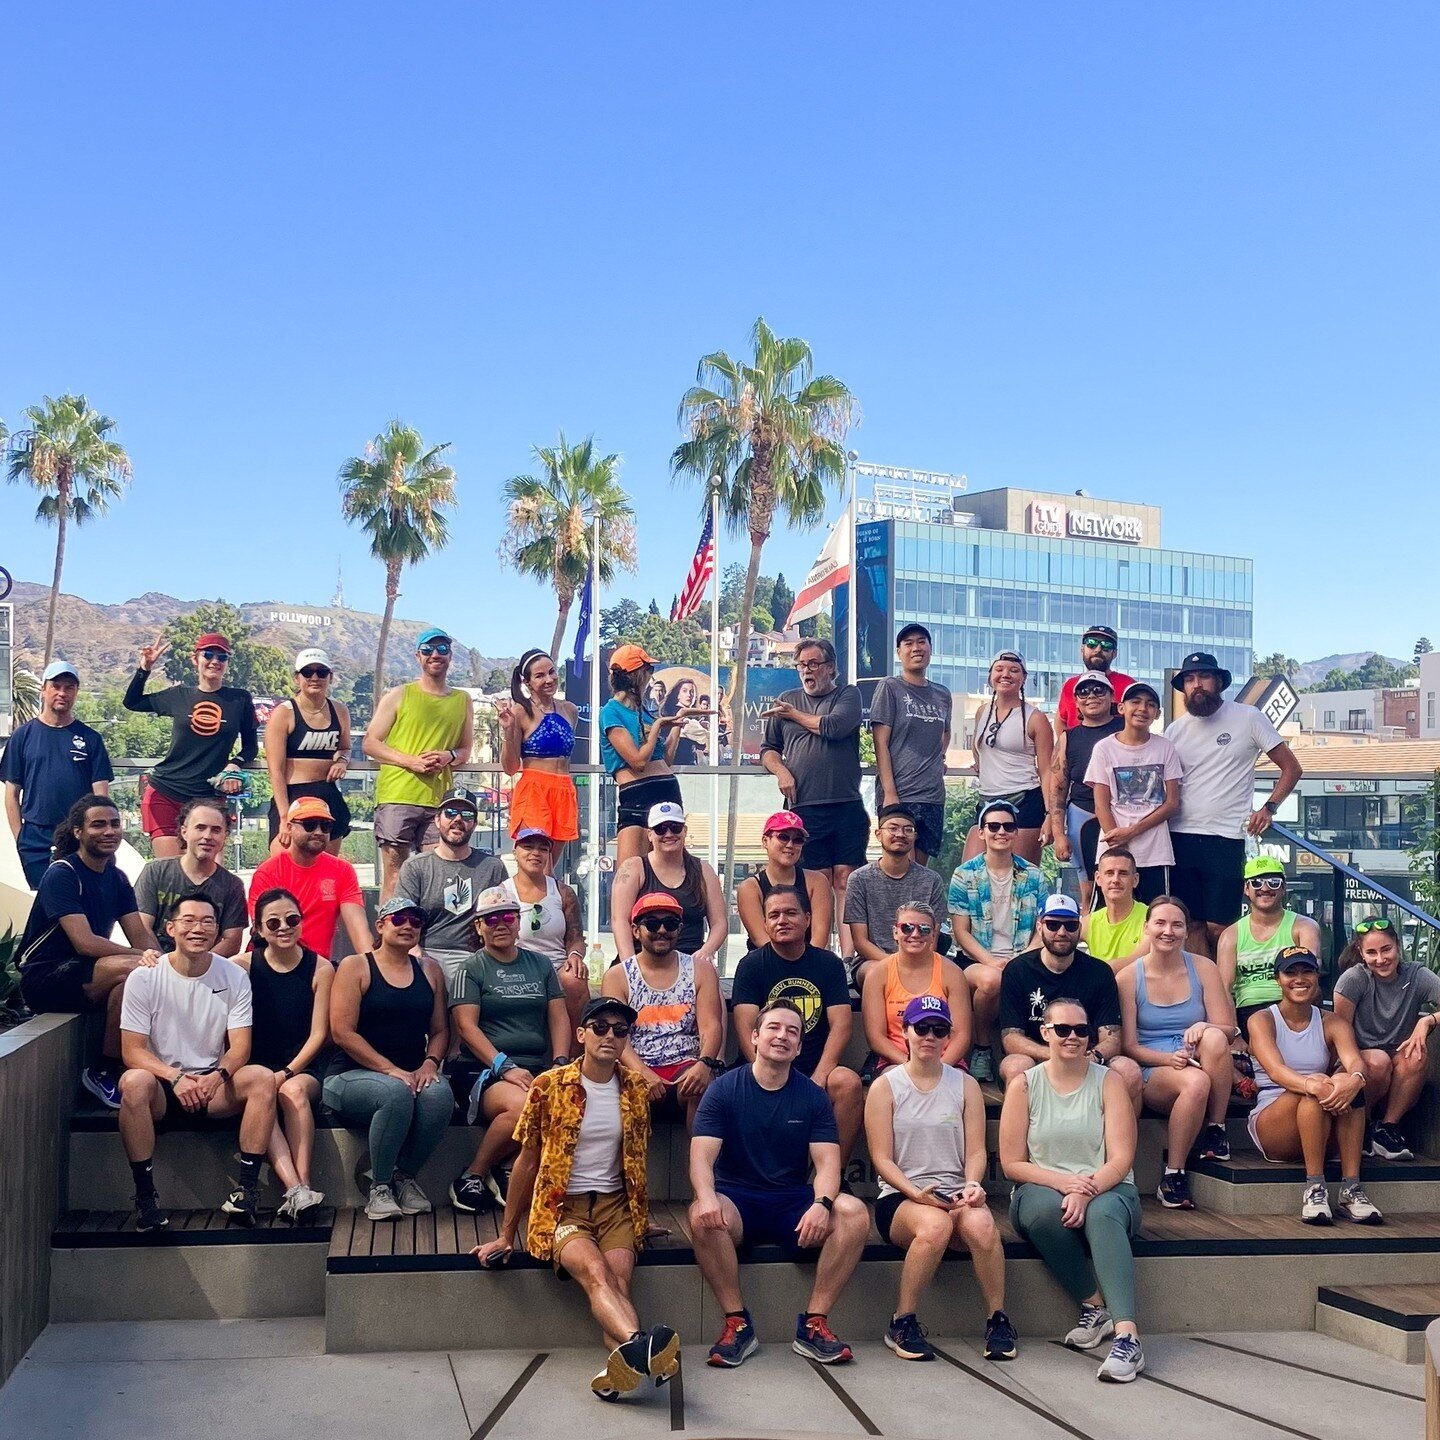 Calling all local run enthusiasts! We're partnering with @silverlaketrackclub for our latest Community Run this Sunday 9/10 for a fun run around Hollywood. We'll have free treats from @teaandcoffeeexchange - see you there! 🏃&zwj;♂️🏃